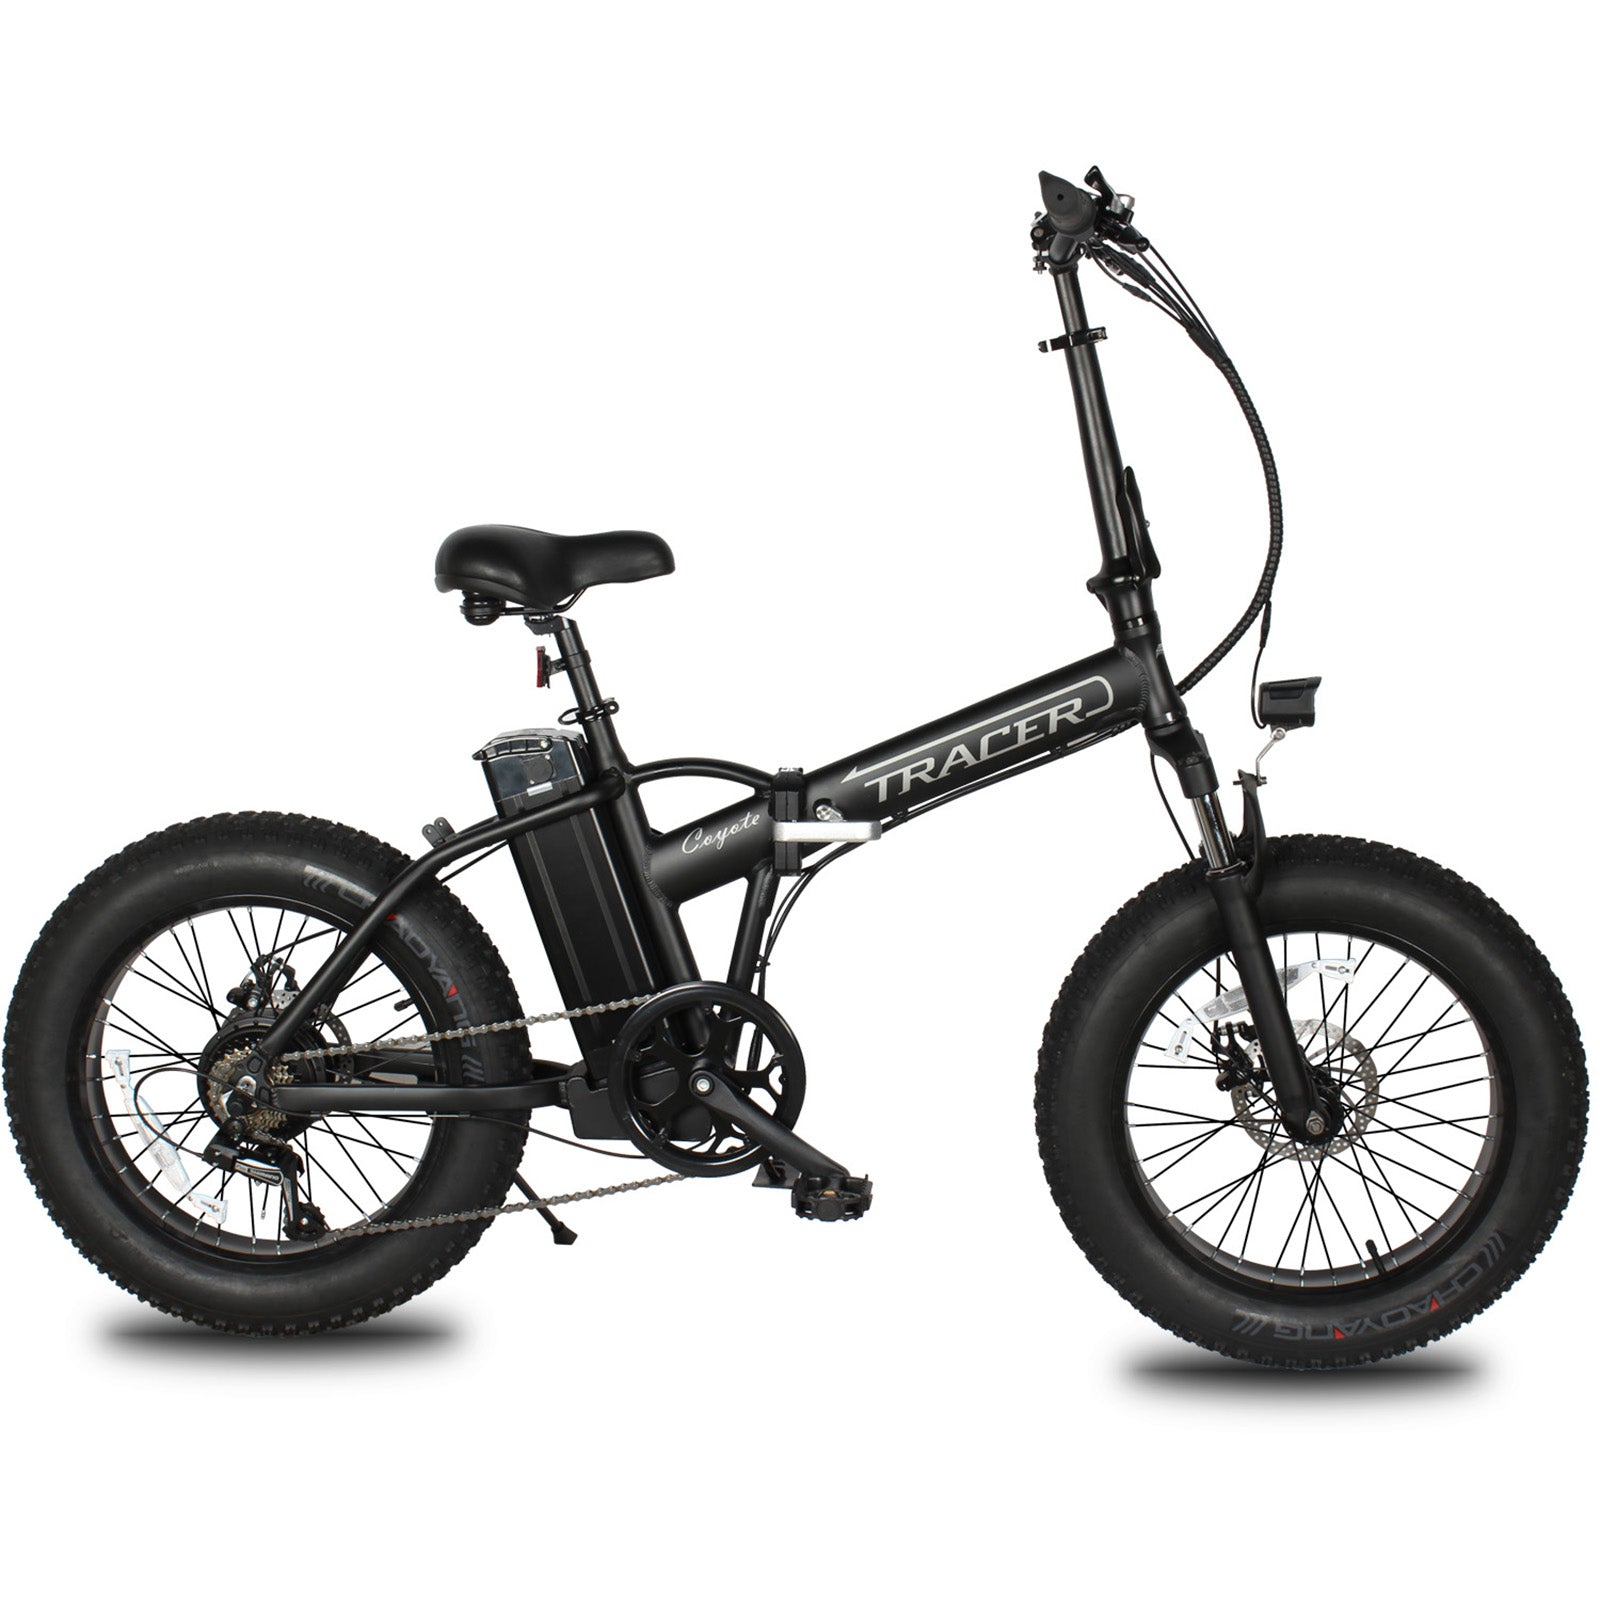 Tracer Coyote 20 Inch 500W Foldable Electric Bike,Shimano RD-TY21 GS 7 speed derailleur, 20''x 4'' fat tire with 160mm disc Brake - Tracer Bikes